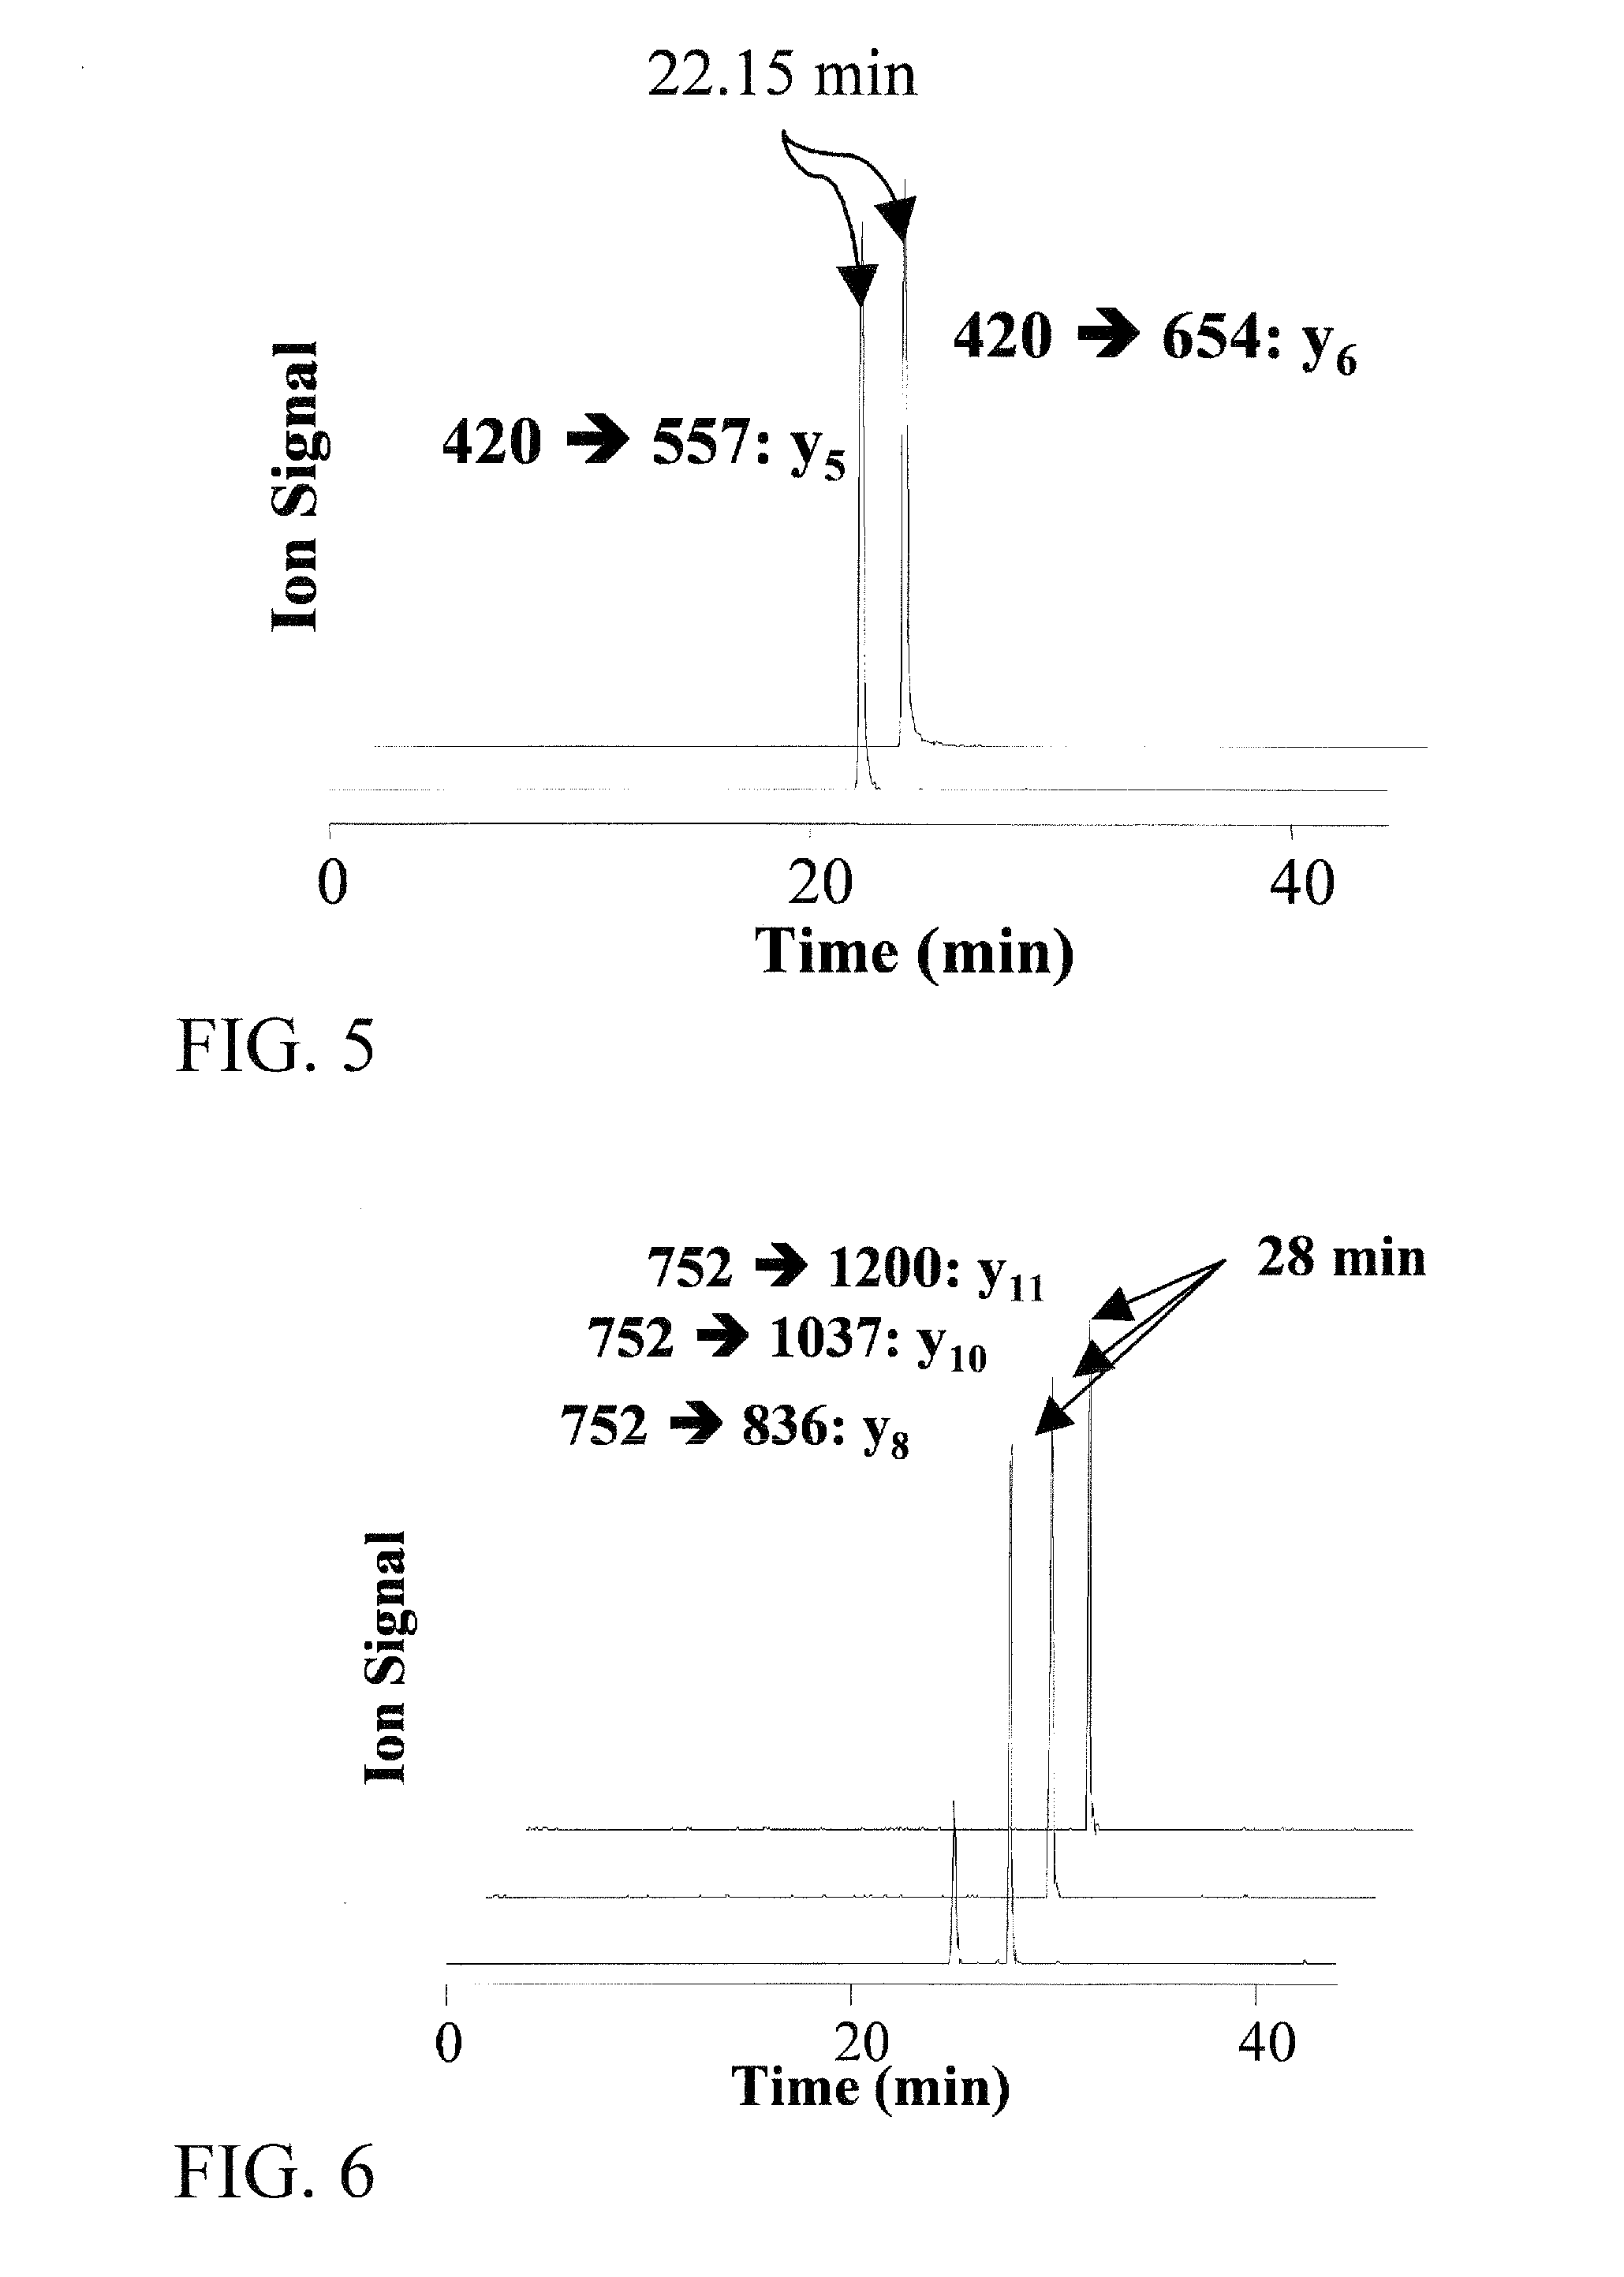 Methods and materials for monitoring myeloma using quantitative mass spectrometry